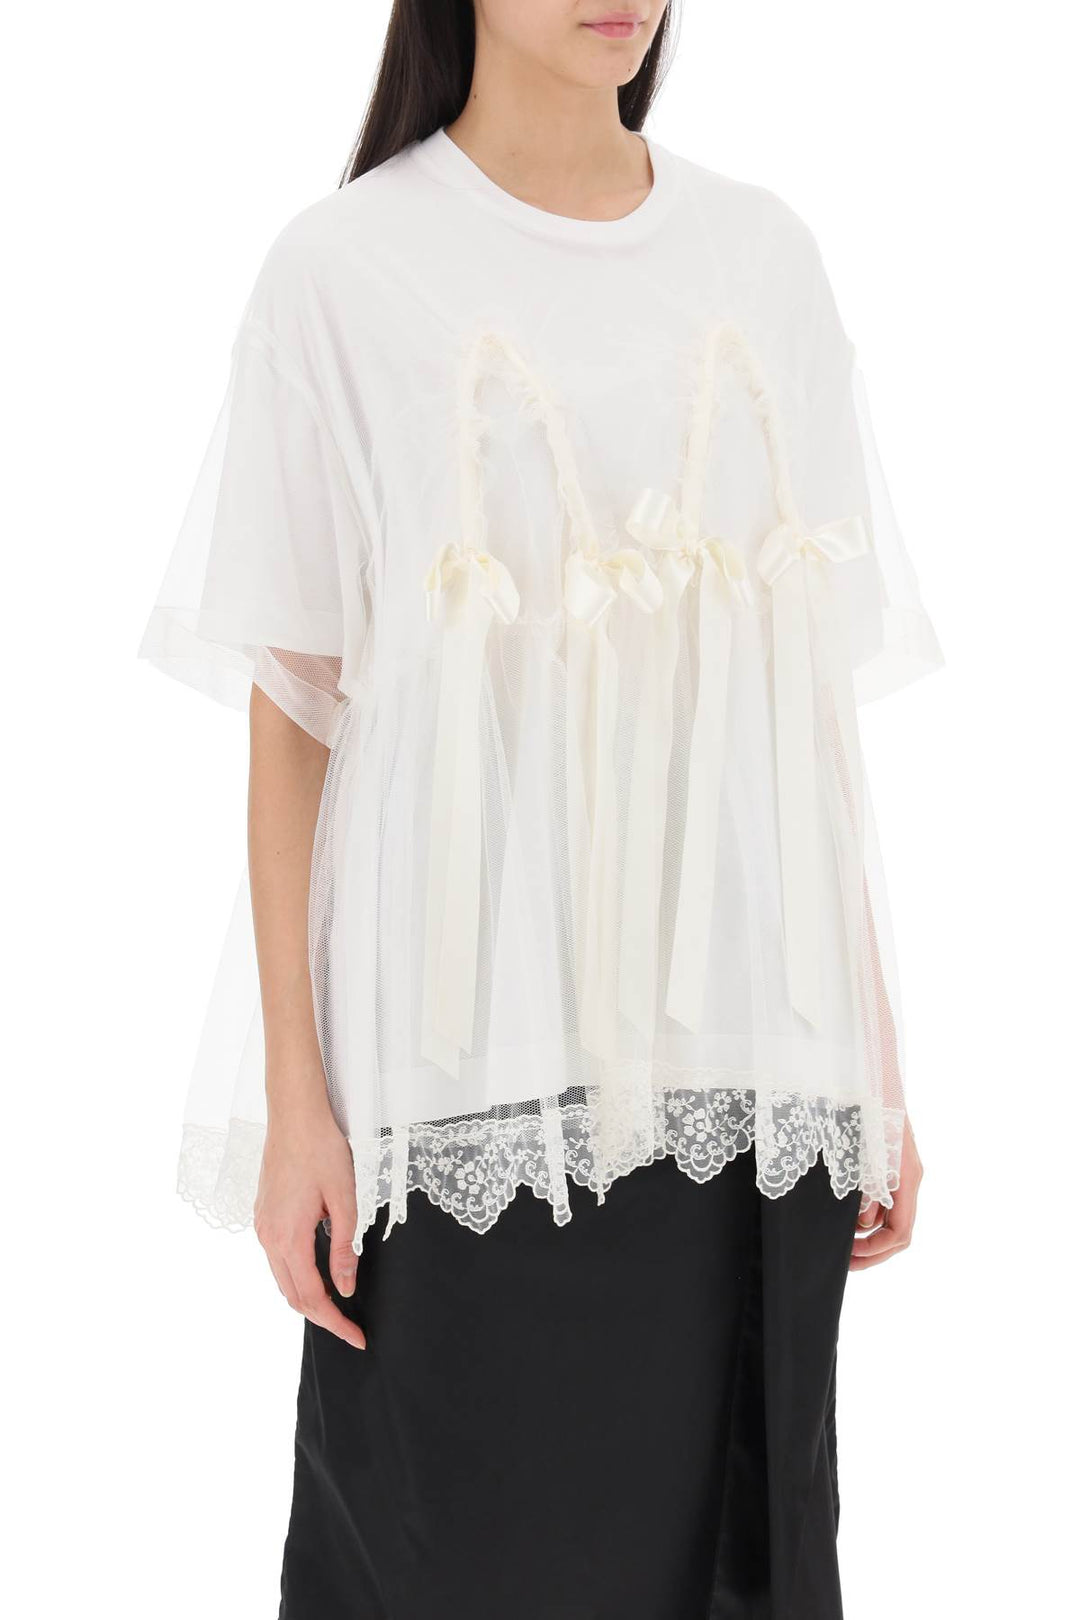 Simone Rocha Tulle Top With Lace And Bows   Bianco